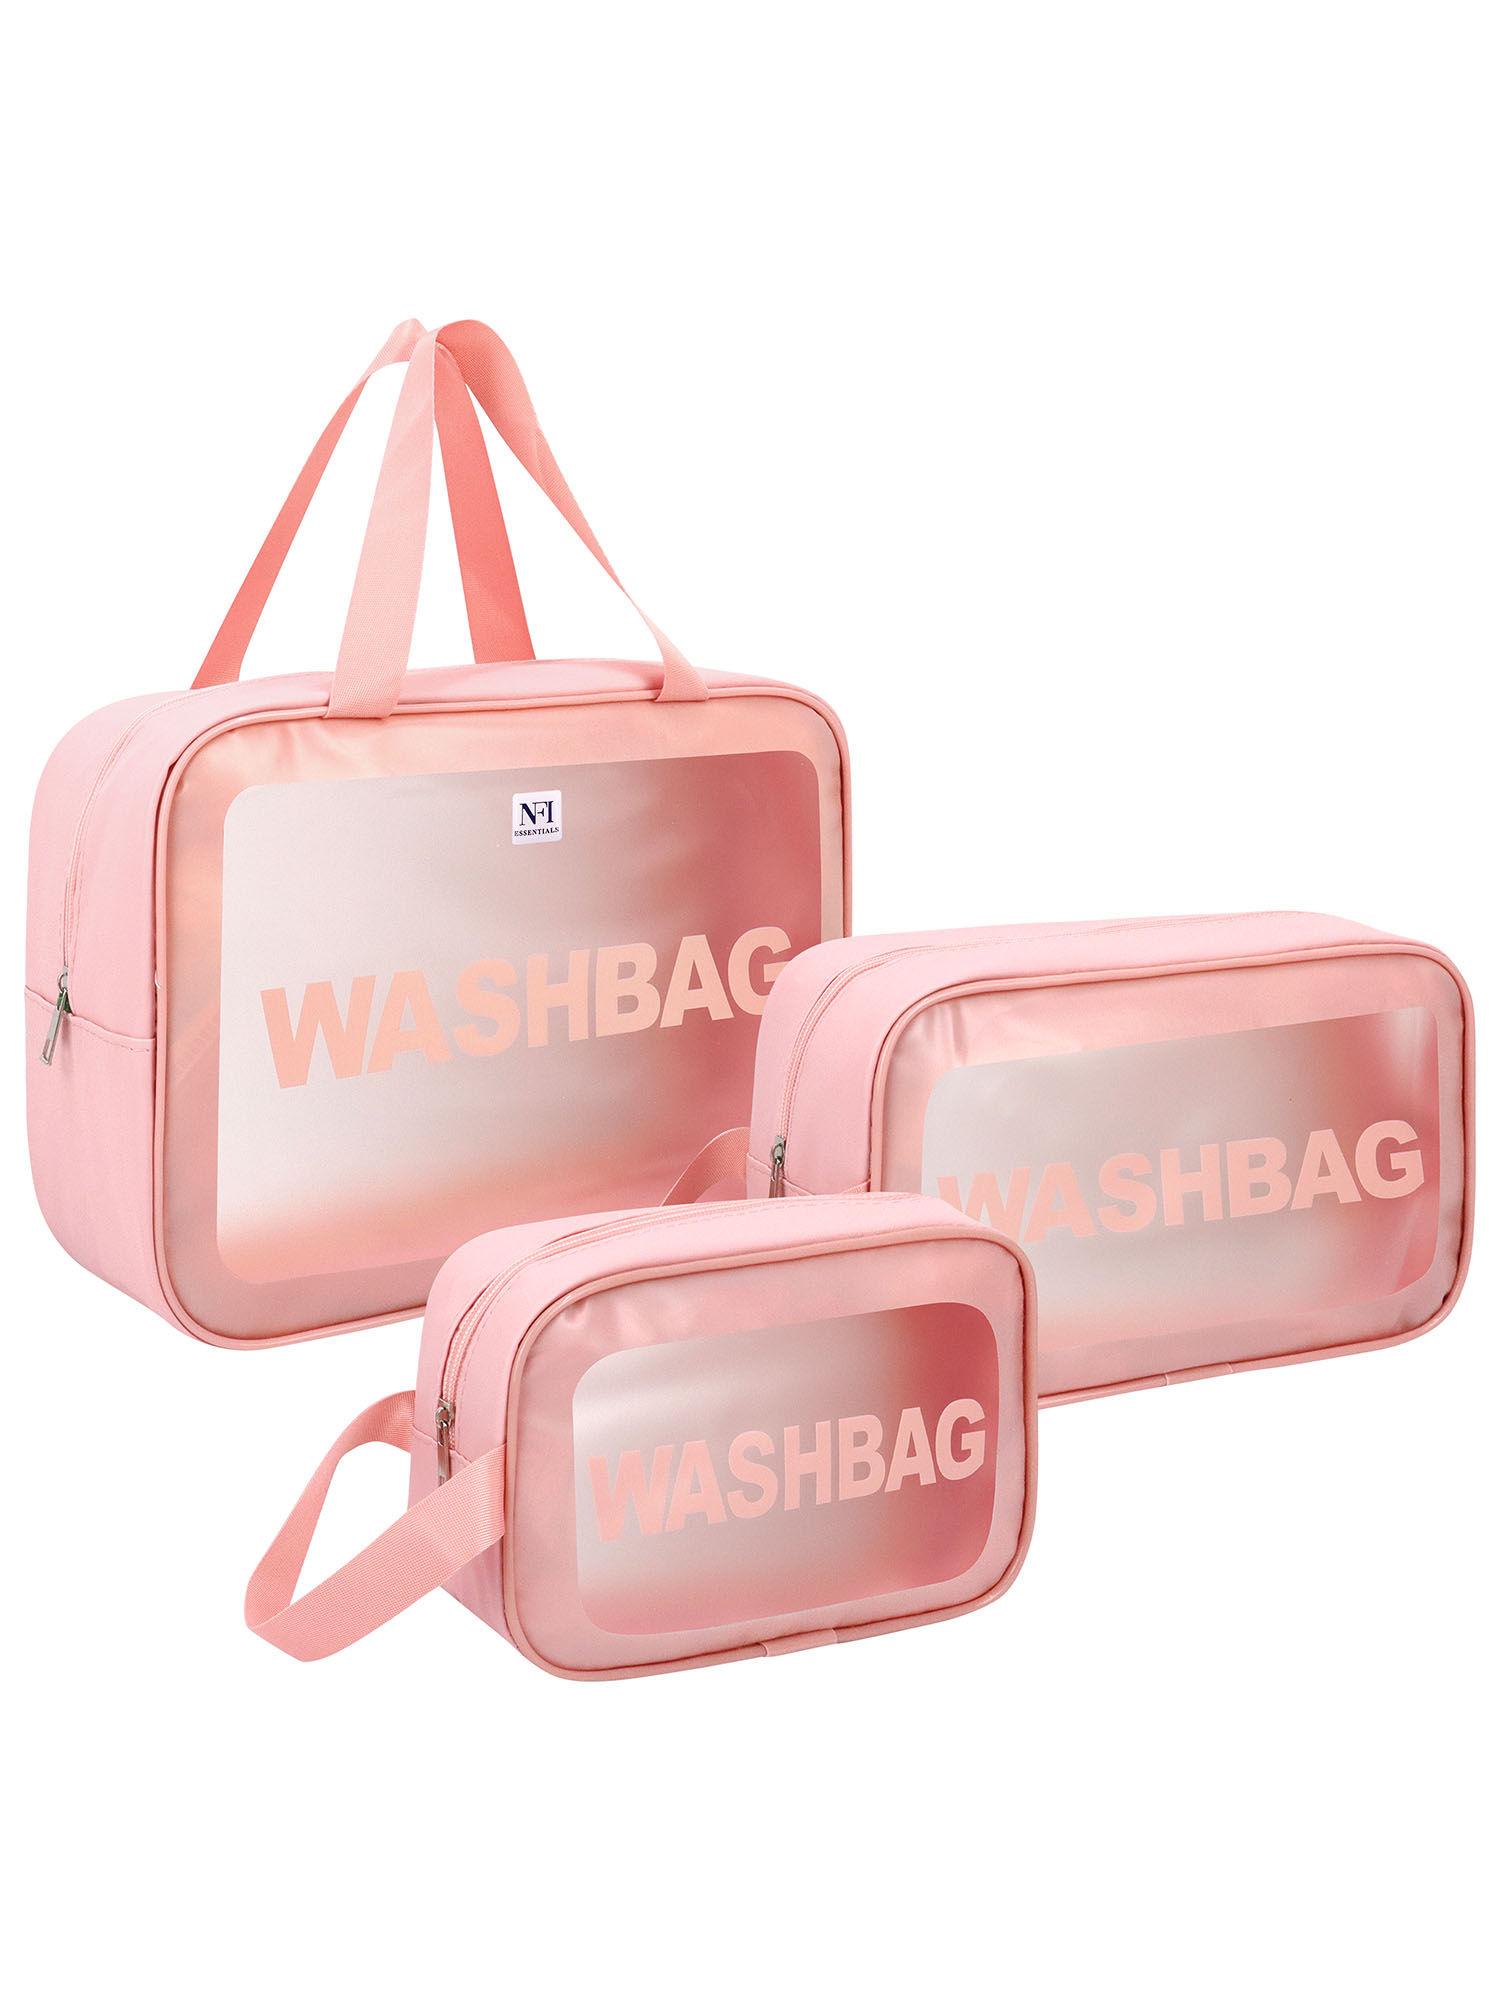 transparent wash bag makeup pouch for women (pack of 3)